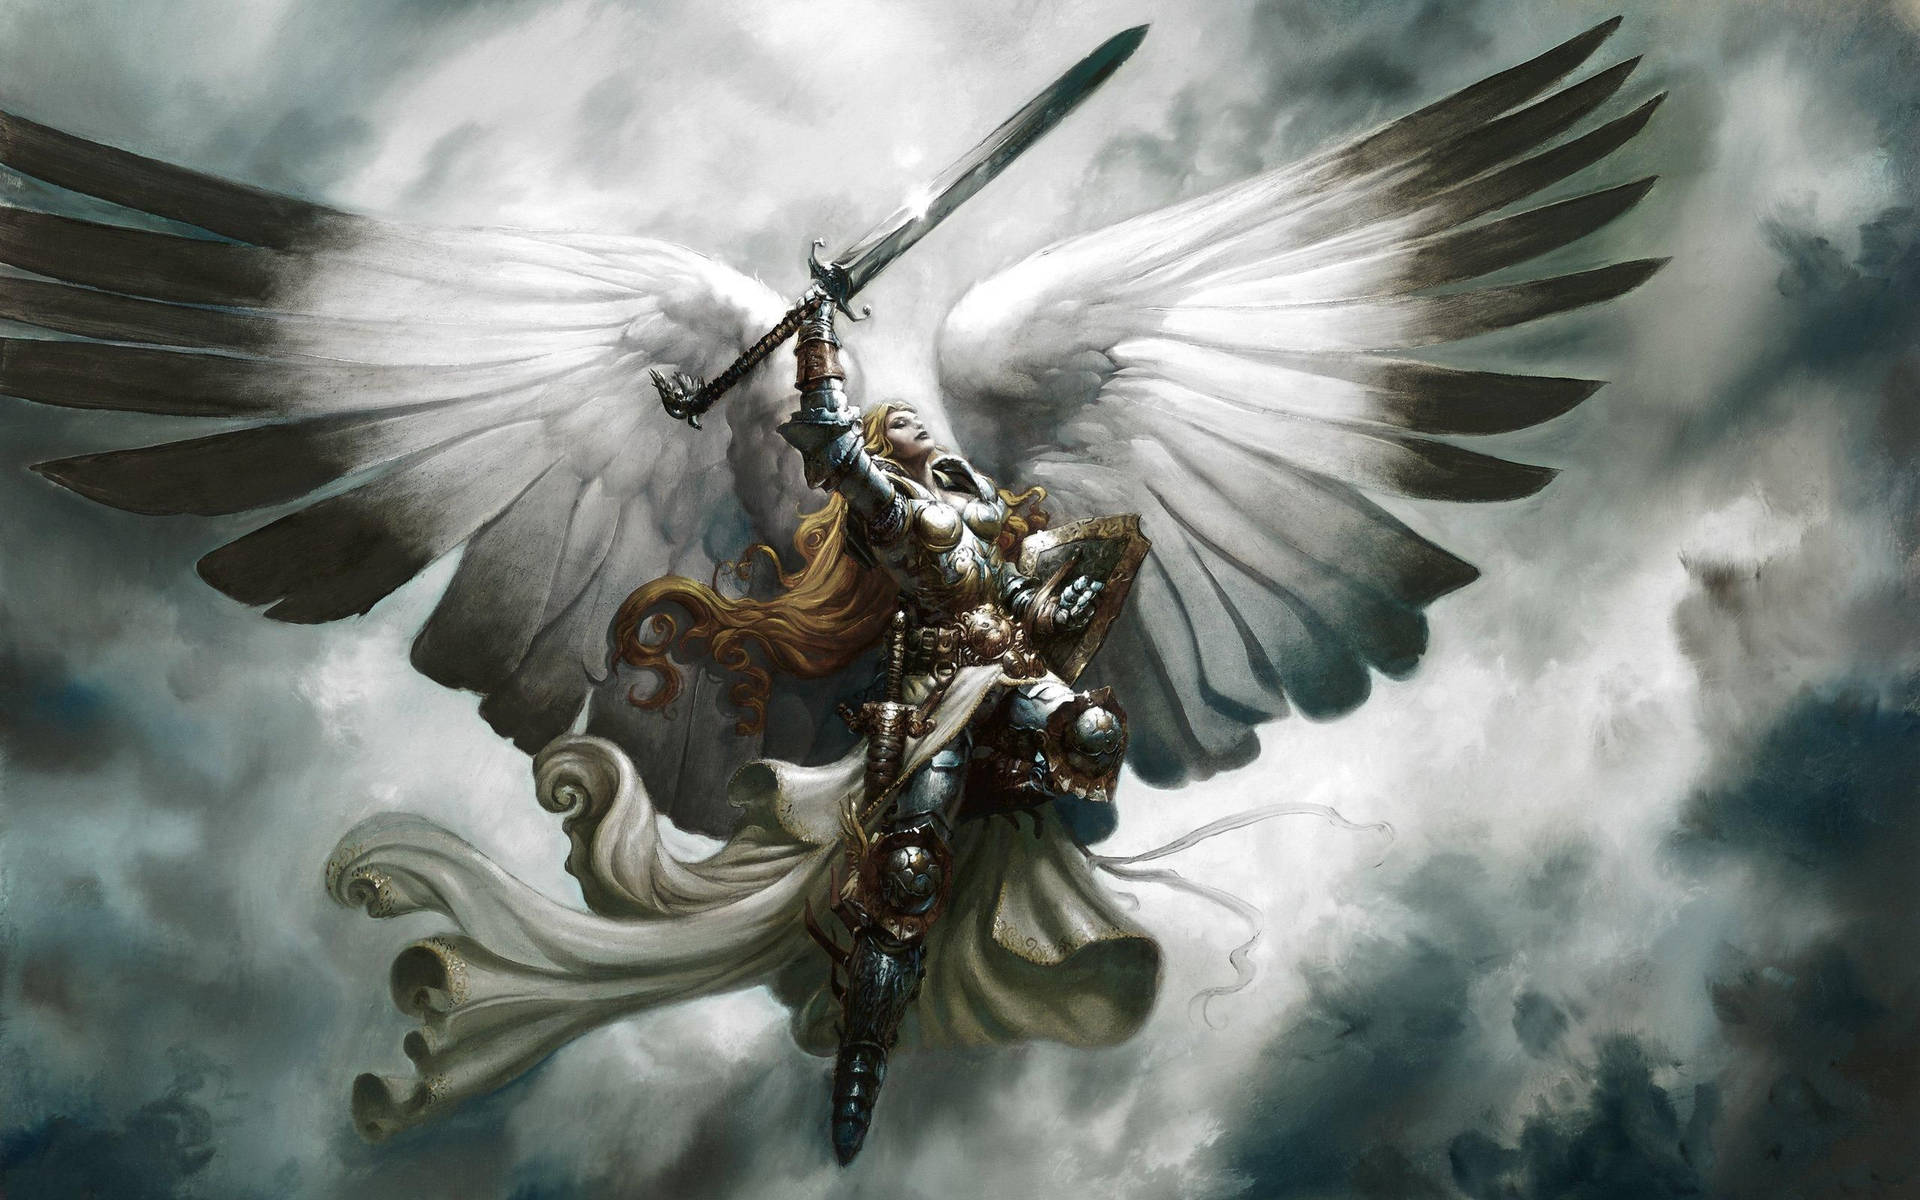 Feel the divine power of the Serra Angel in Magic the Gathering Wallpaper